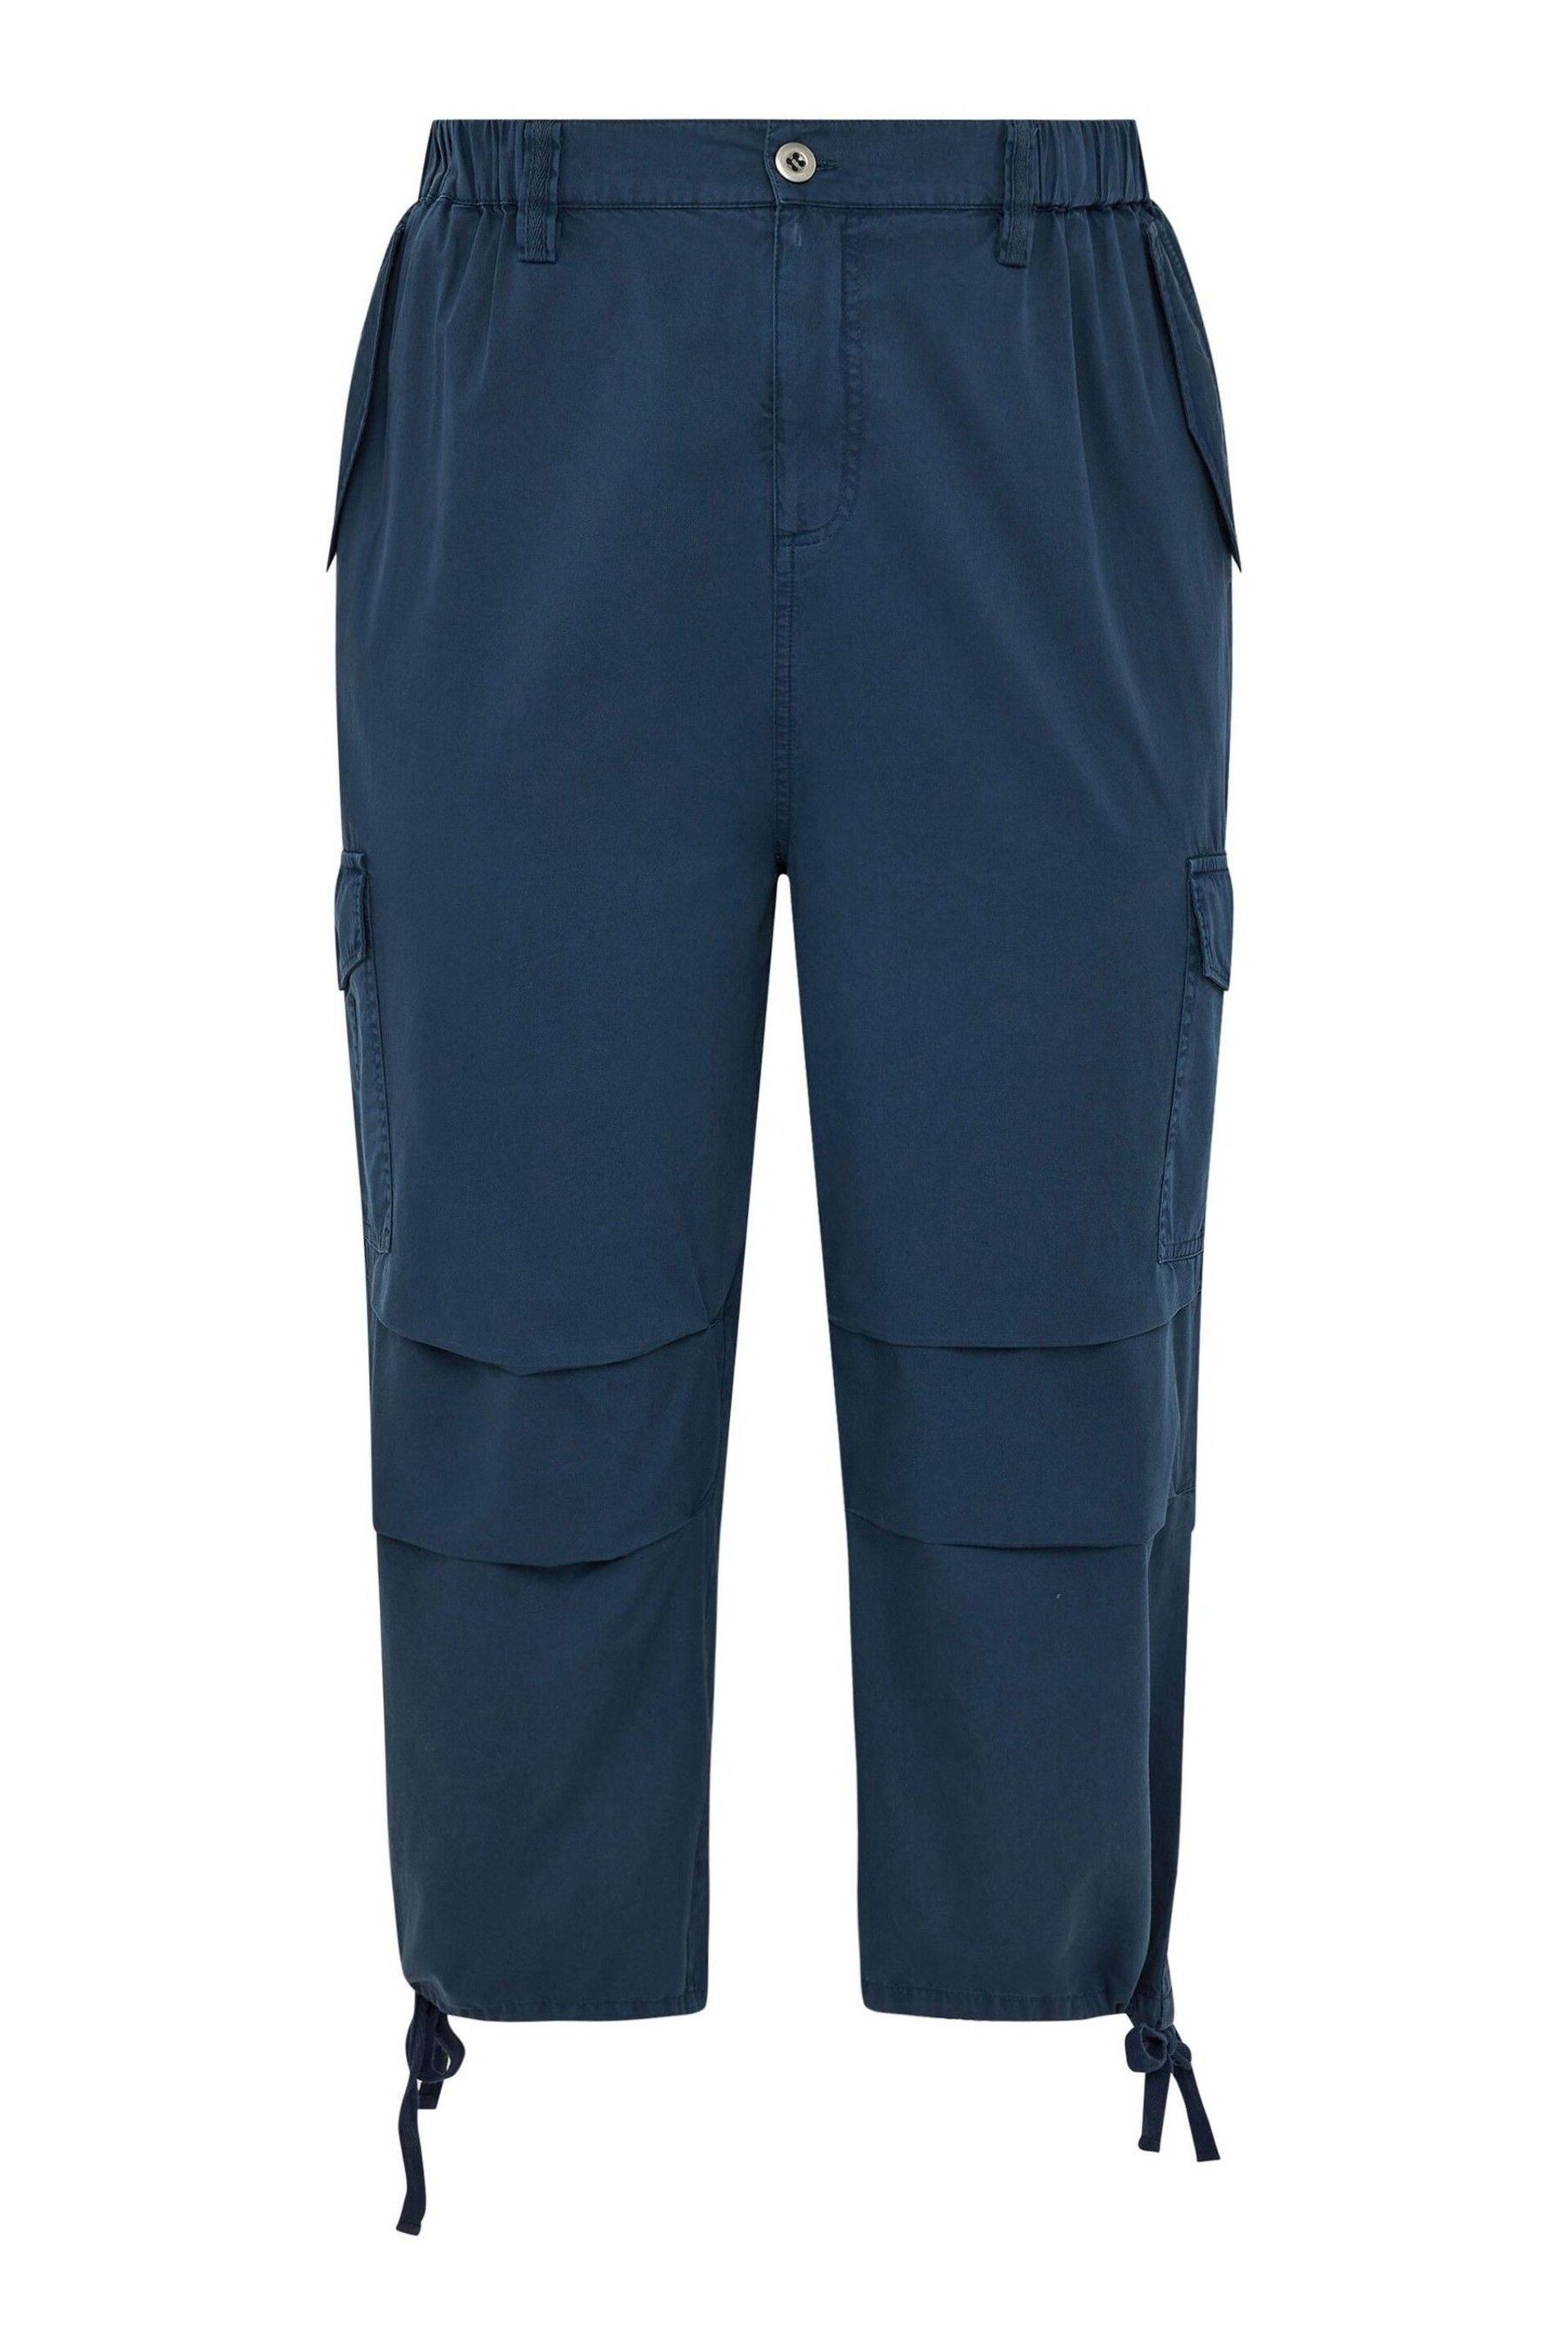 Yours Curve Blue Cargo Cropped Trousers - Image 5 of 5